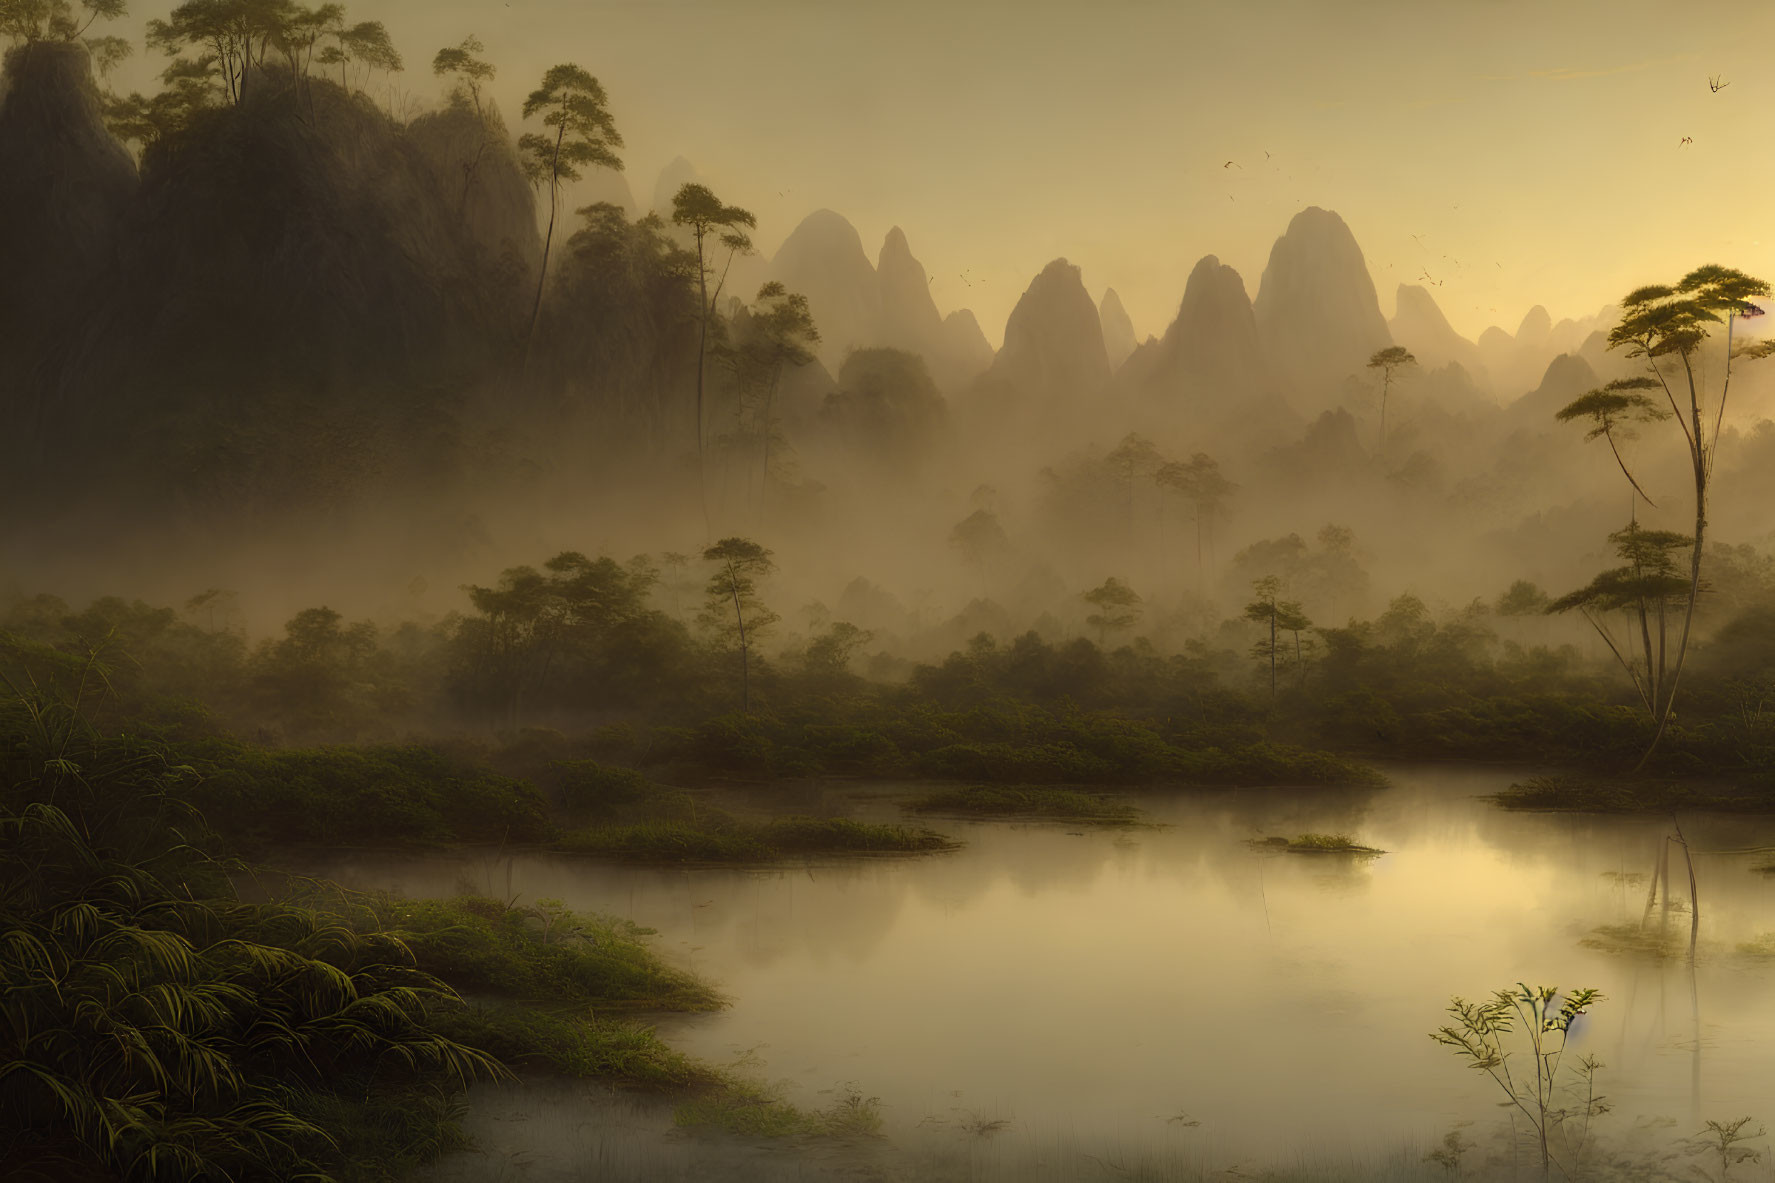 Serene misty landscape at dawn with reflective water, dense forest, and fog-shrouded peaks